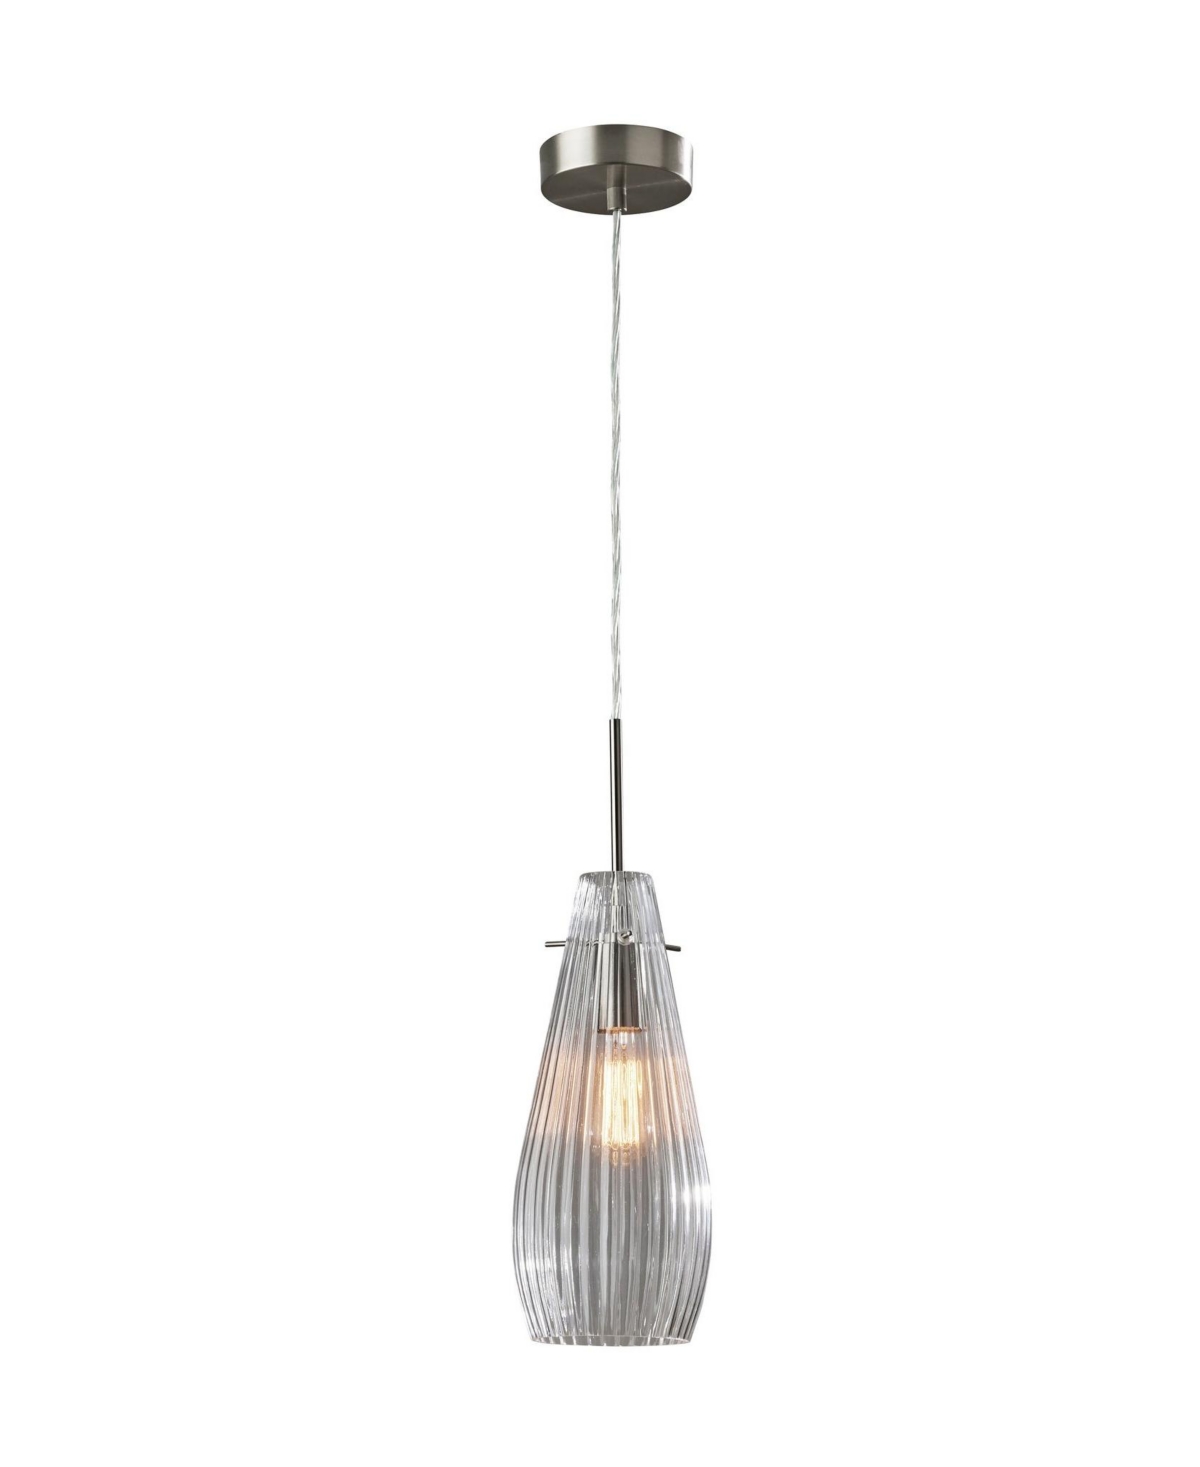 Adesso Layla Pendant Lamp In Brushed Steel